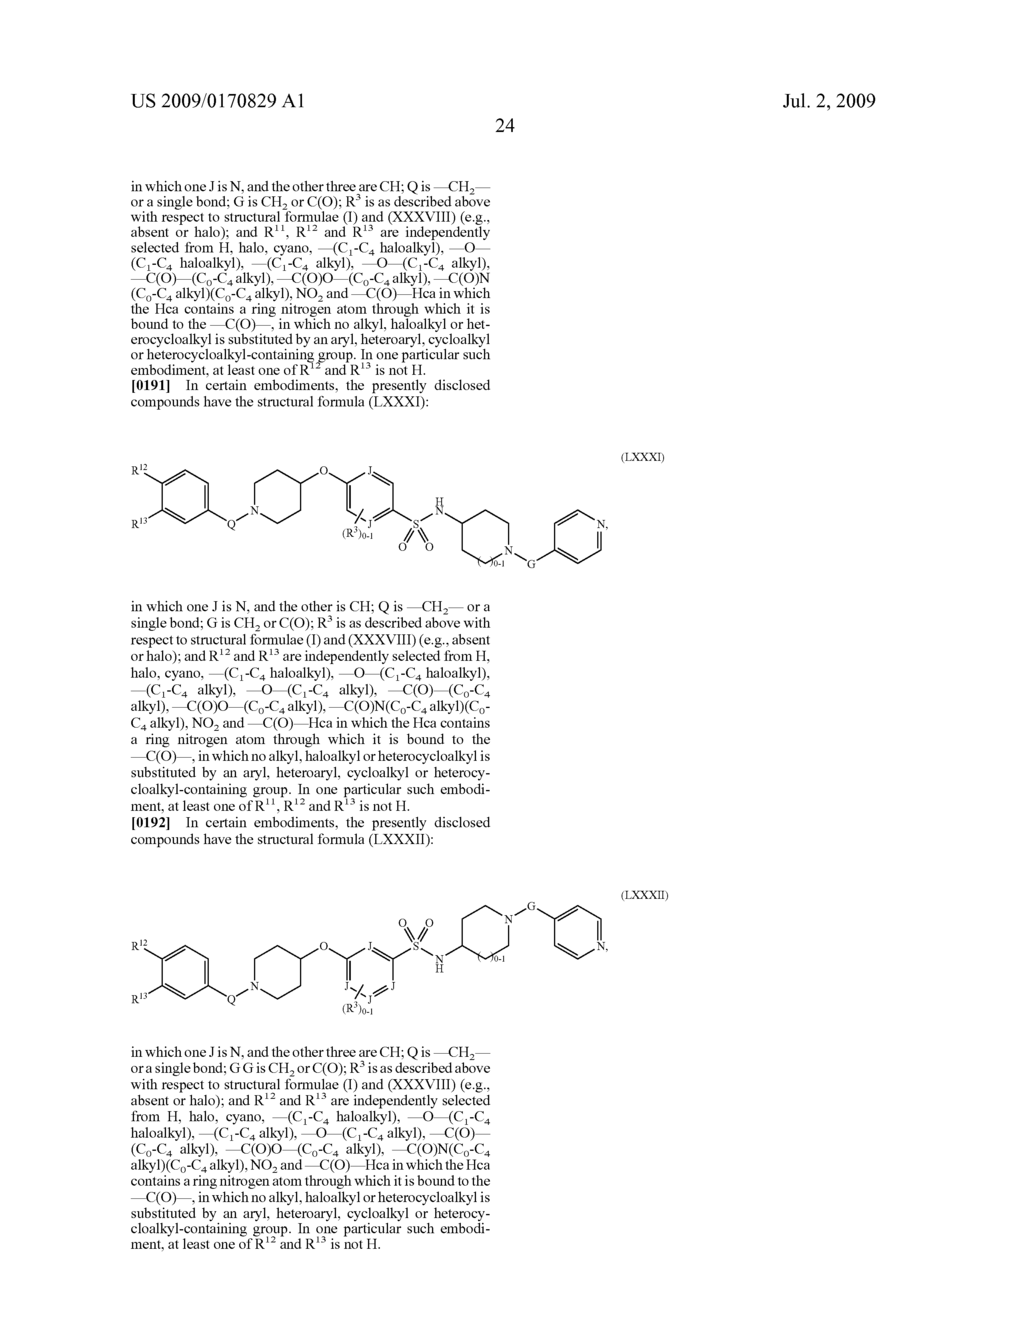 Carboxamide, Sulfonamide and Amine Compounds and Methods for Using The Same - diagram, schematic, and image 25